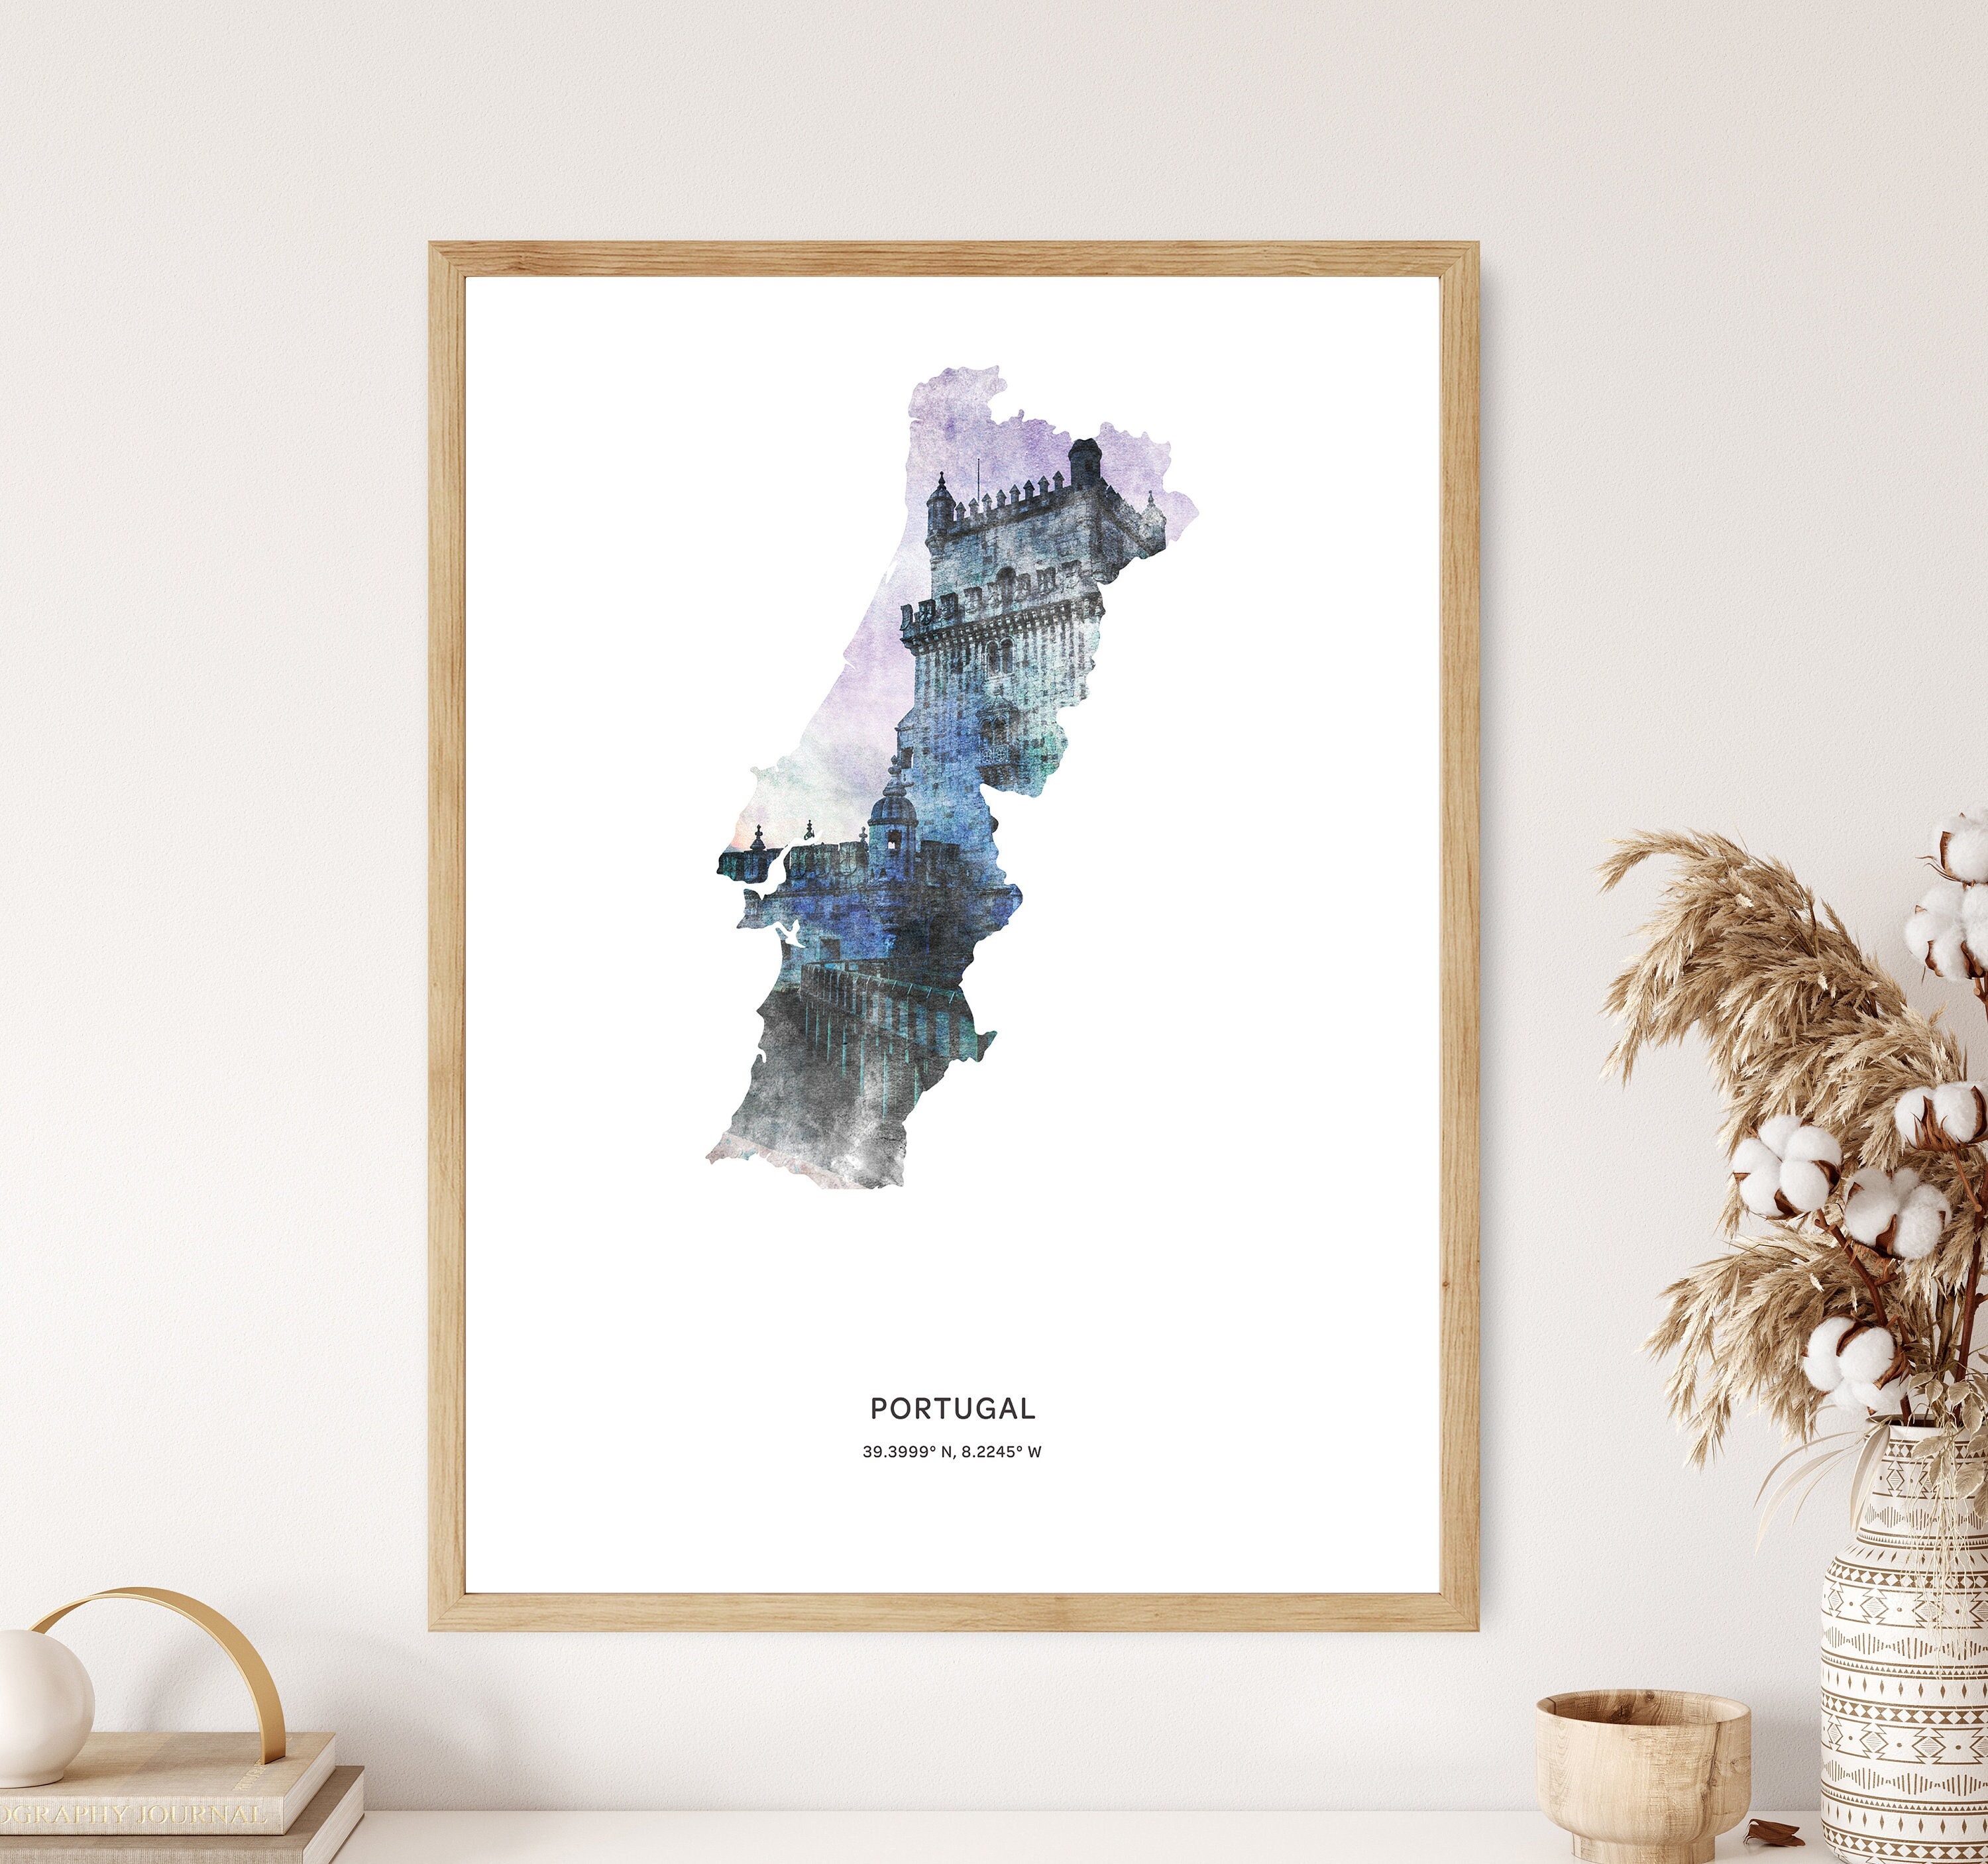  Portugal Wine Regions Map 1958 Canvas Living Room Decor Poster  Artwork Home Wall Decor Canvas Poster Wall Art Decor Print Picture  Paintings for Living Room Bedroom Decoration 24x36inch(60x90cm): Posters &  Prints